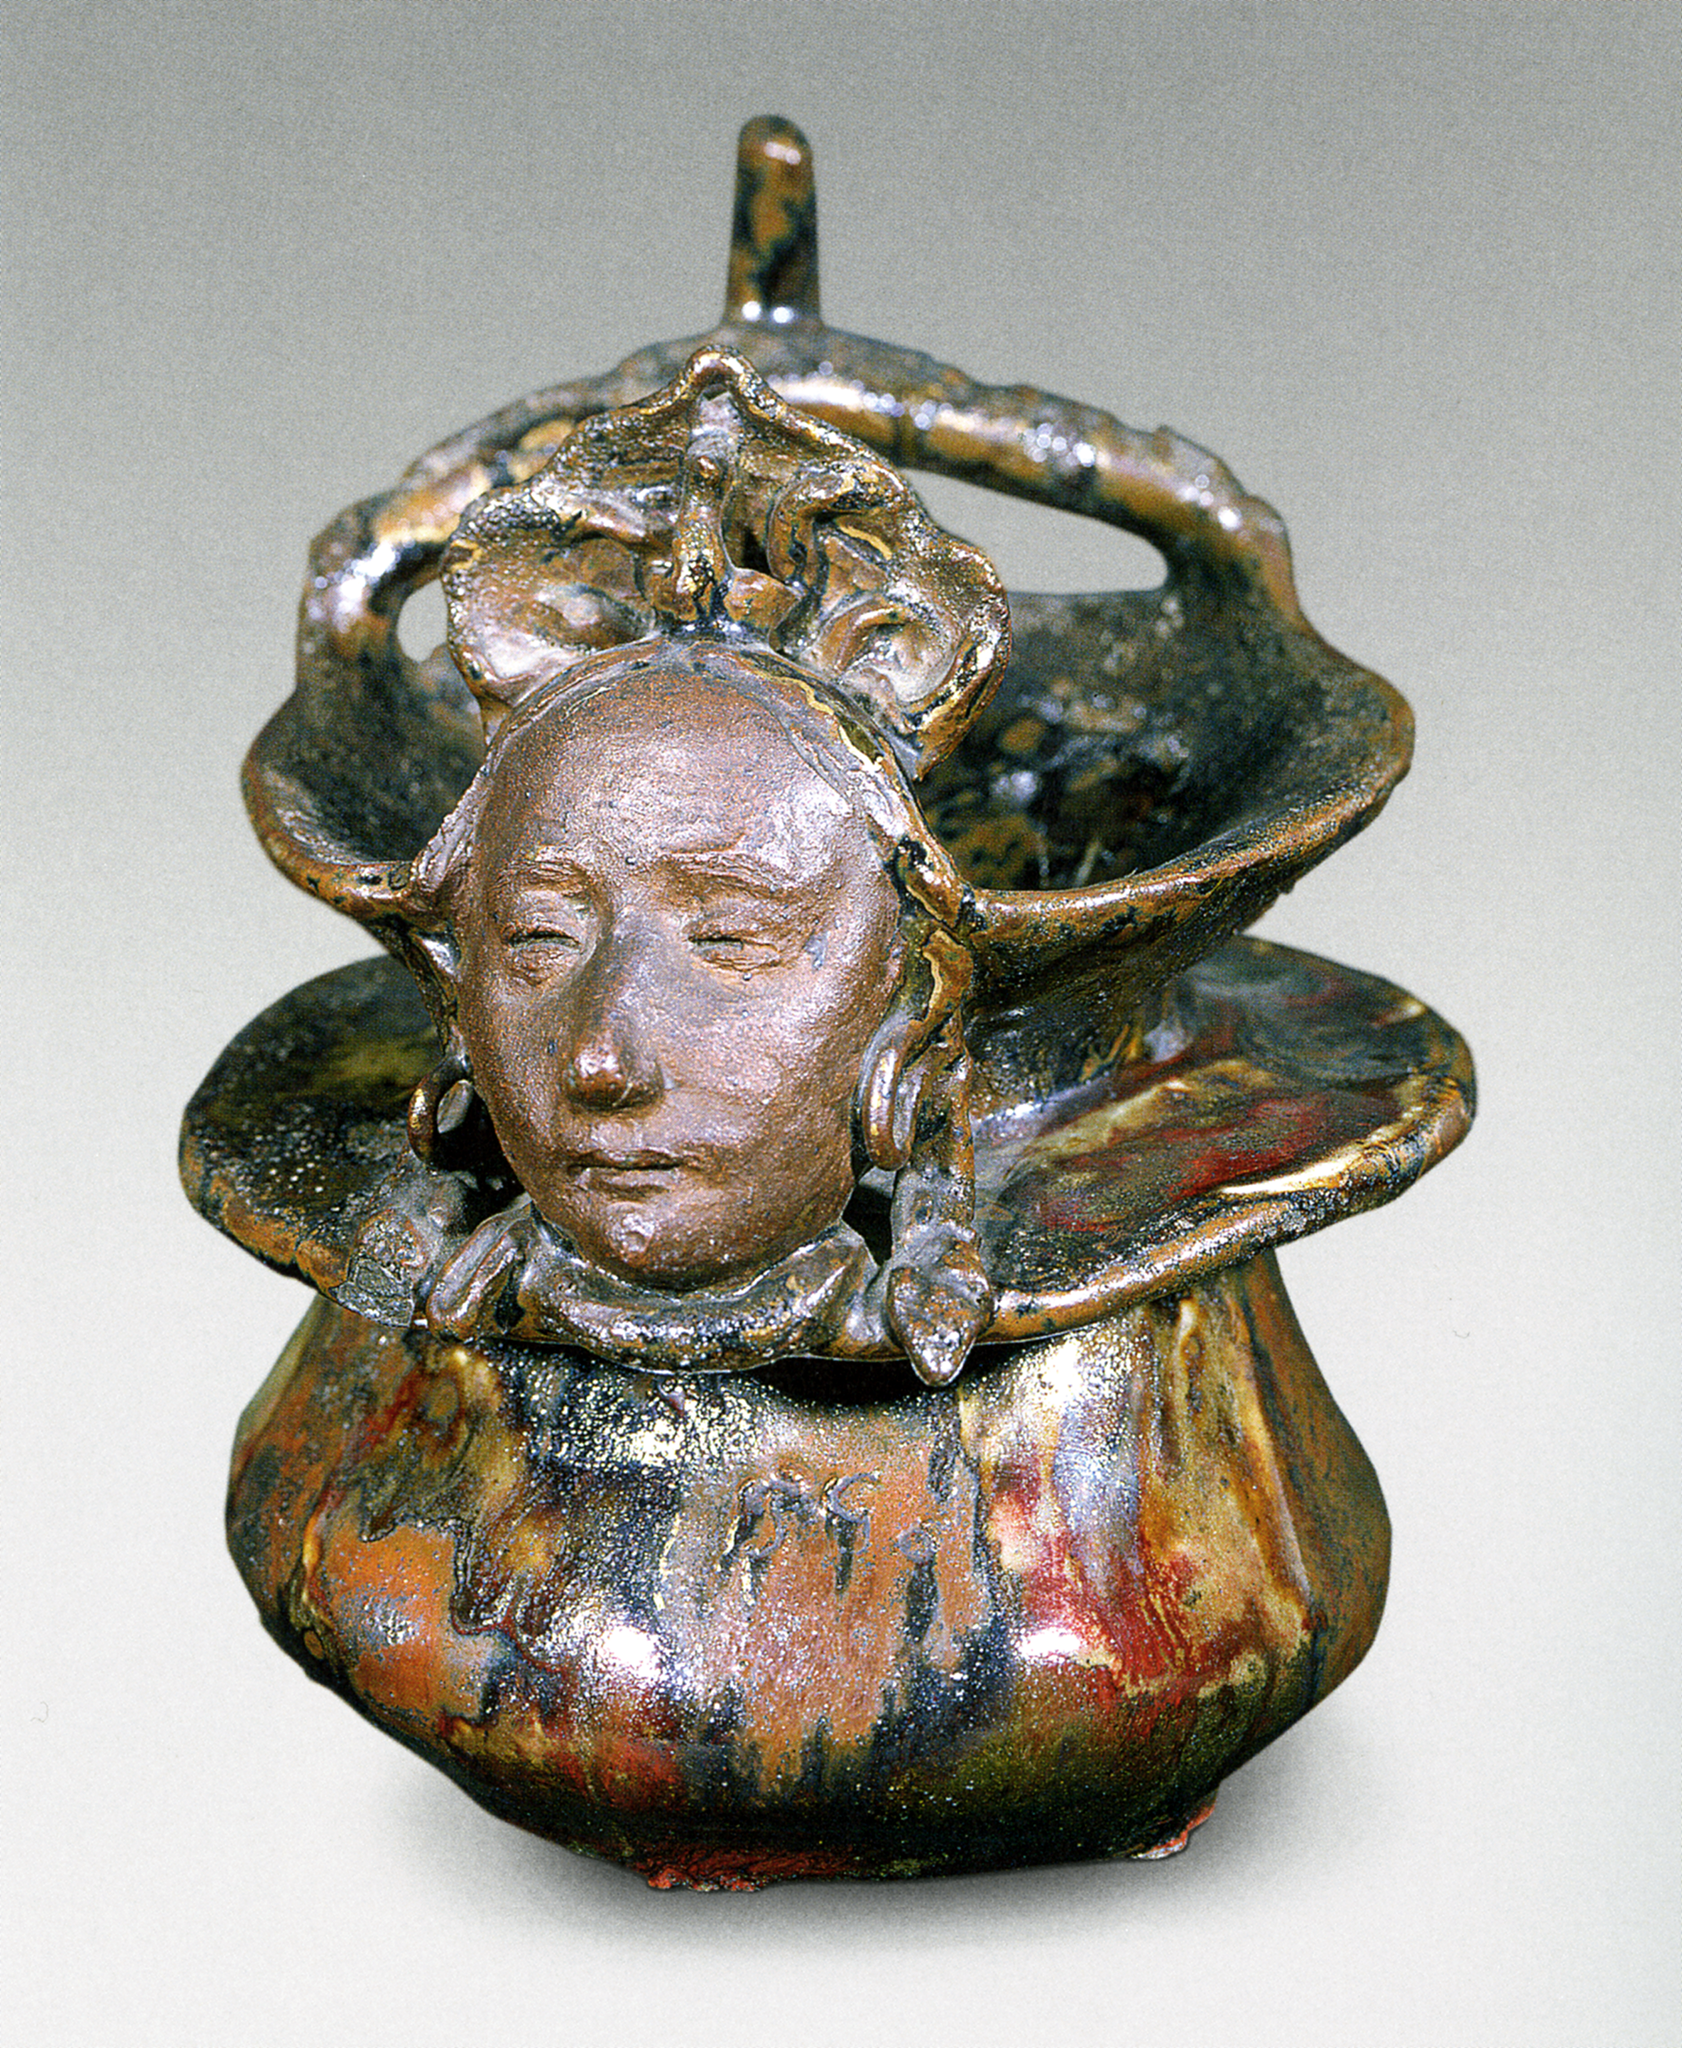 A photograph of a vase with a woman’s head sculpted into it. She appears to be wearing hooped earrings. The vase itself has a mix of various reflective colors such as red, black, and gold or copper.